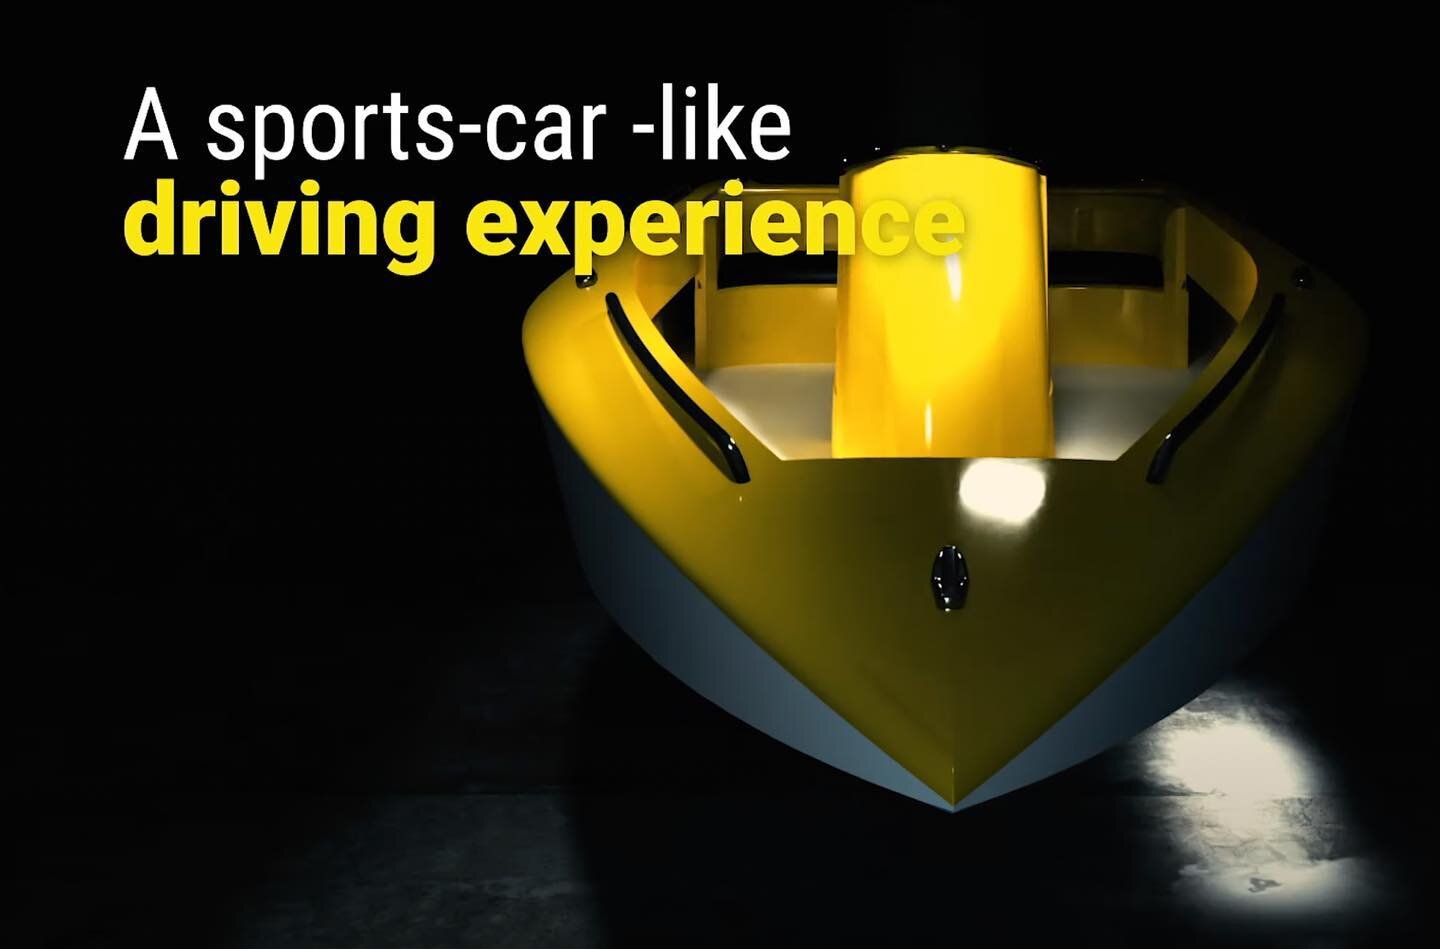 Enjoy the sports car-like driving experience on water like never before.

Welcome to JOIN THE RIDE!

#Parexo #boating #saltlife #ocean #fun #mercury #racing #speedboat